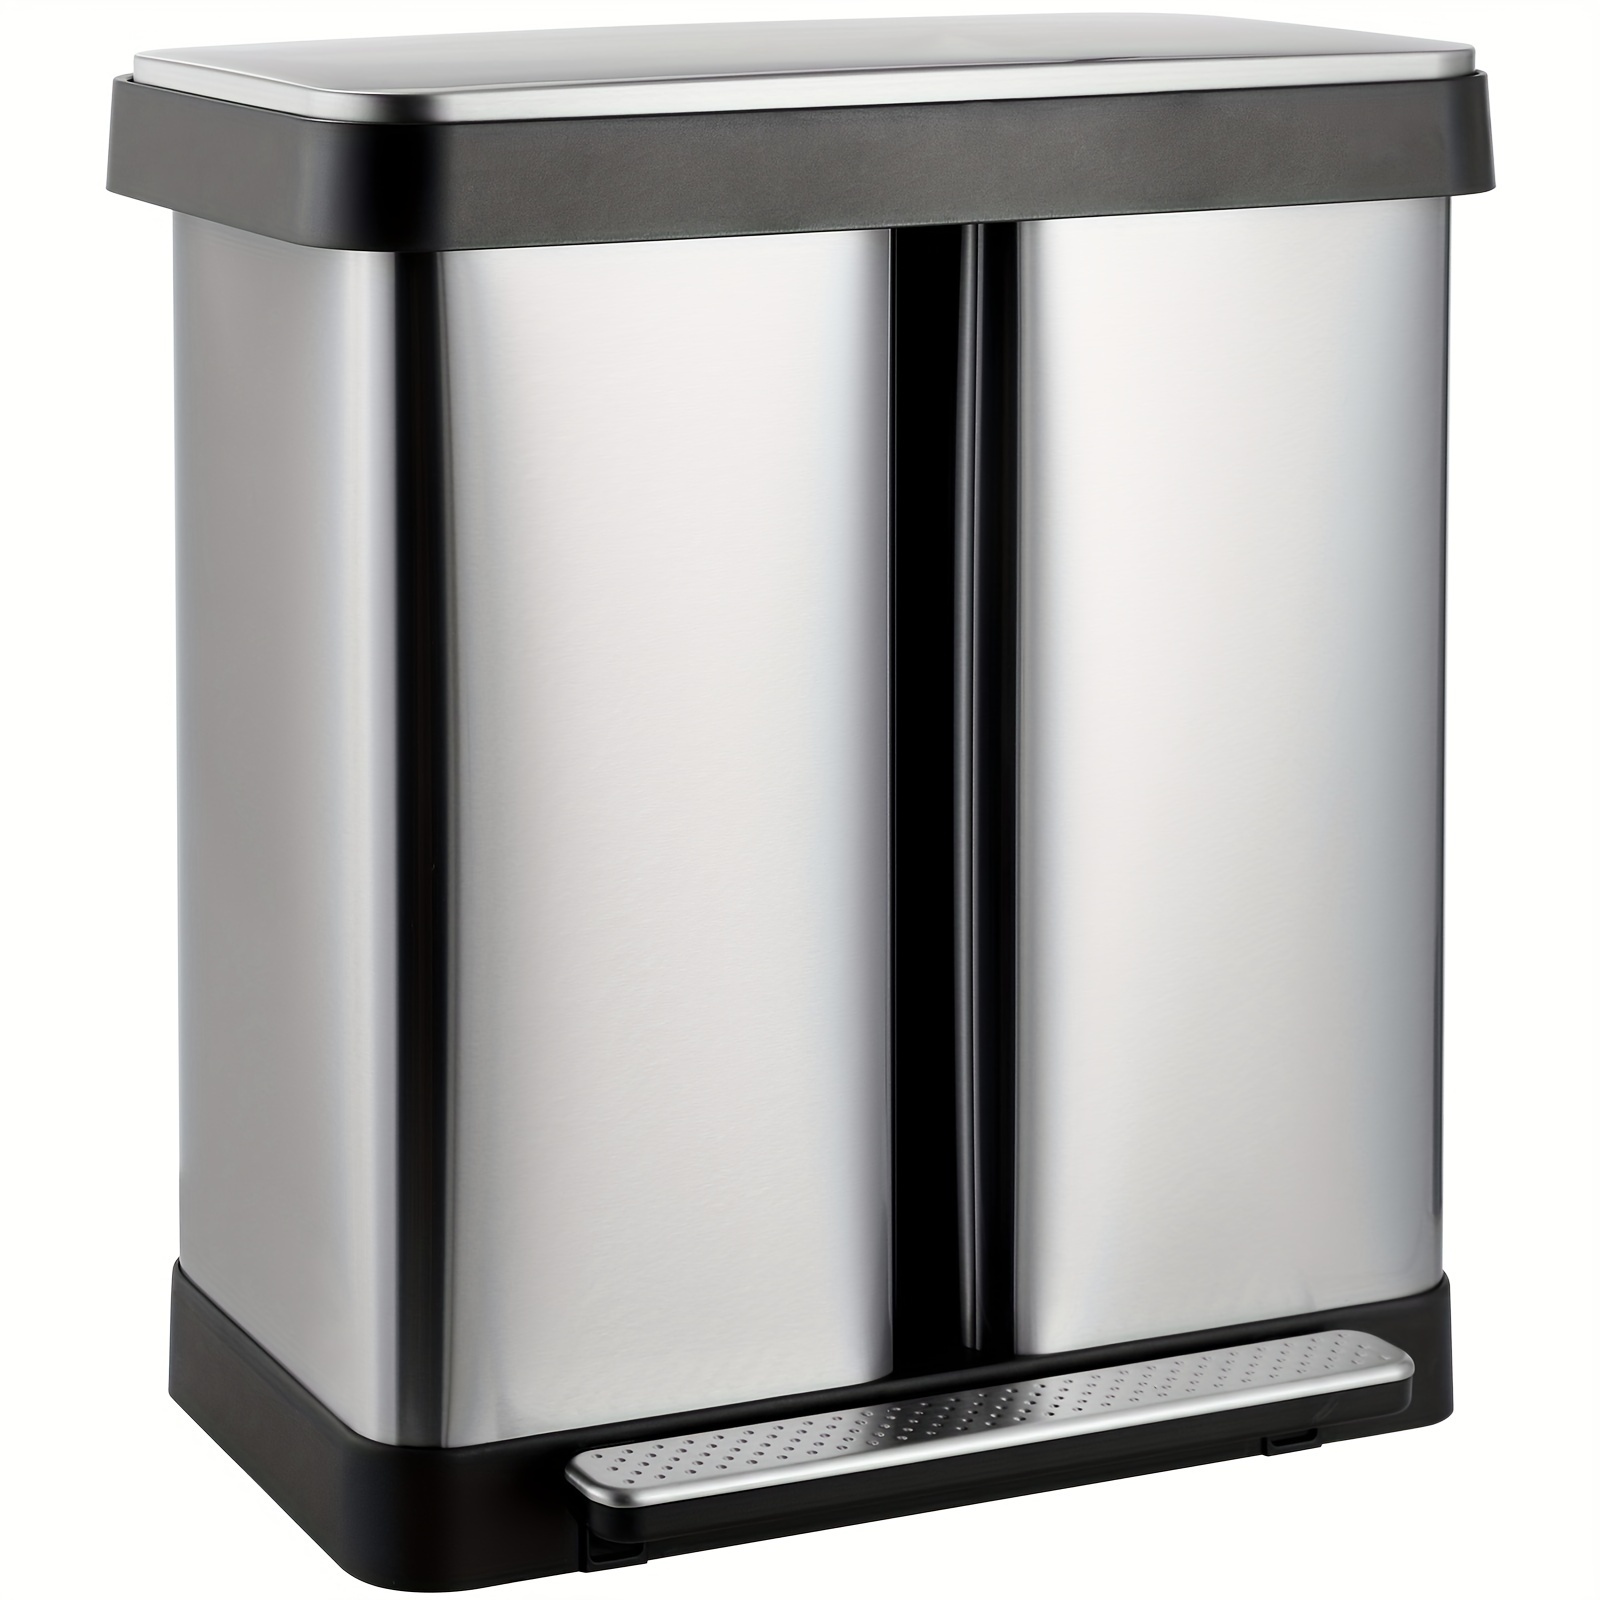 

16 Gallon Dual Trash Can, 60l (2x30l) Stainless Steel Kitchen Garbage Can, Step-on Classified Recycle Garbage Bin With Removable Inner Buckets